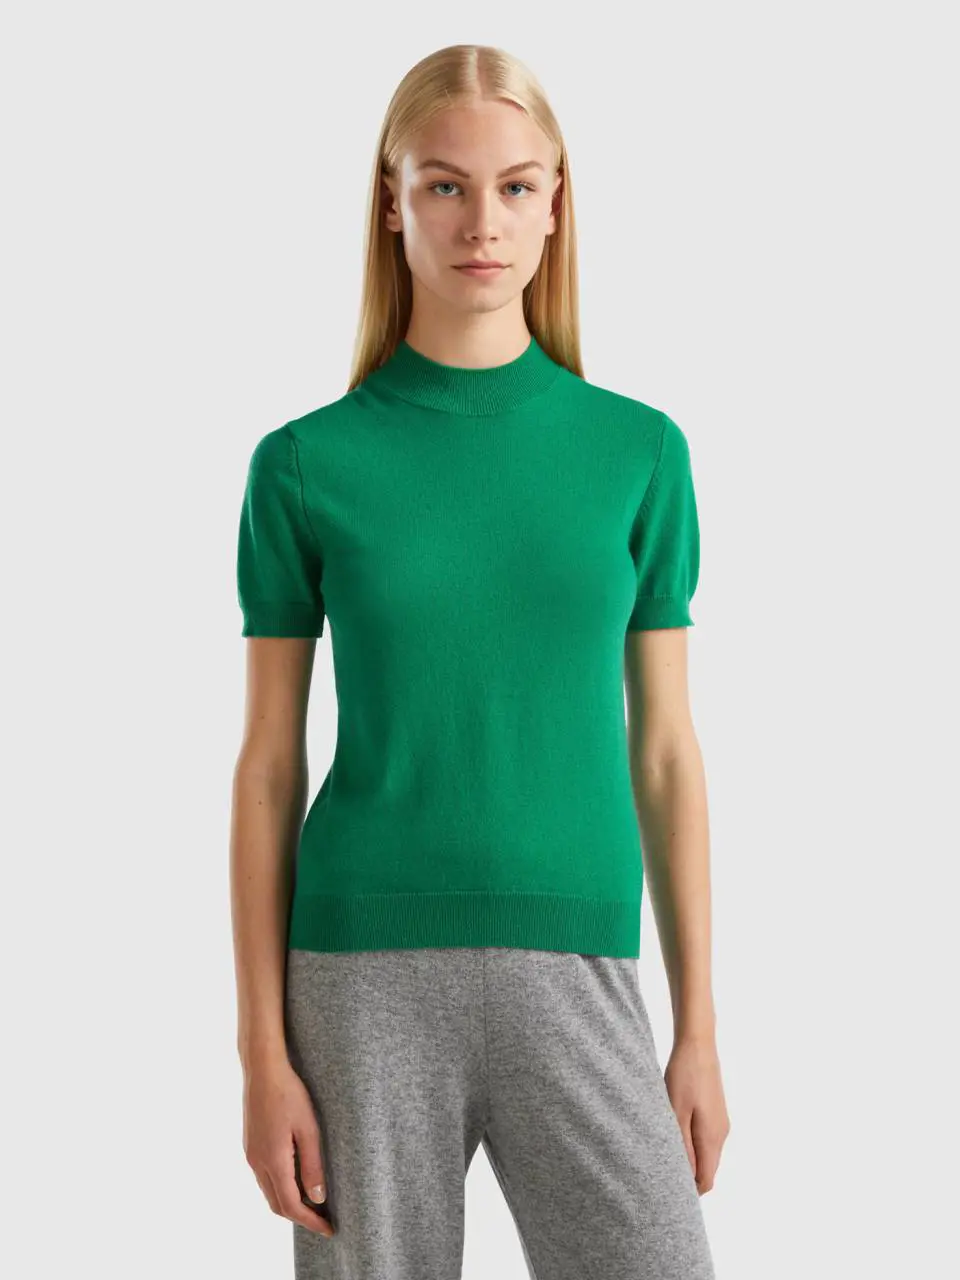 Benetton forest green short sleeve sweater in cashmere blend. 1